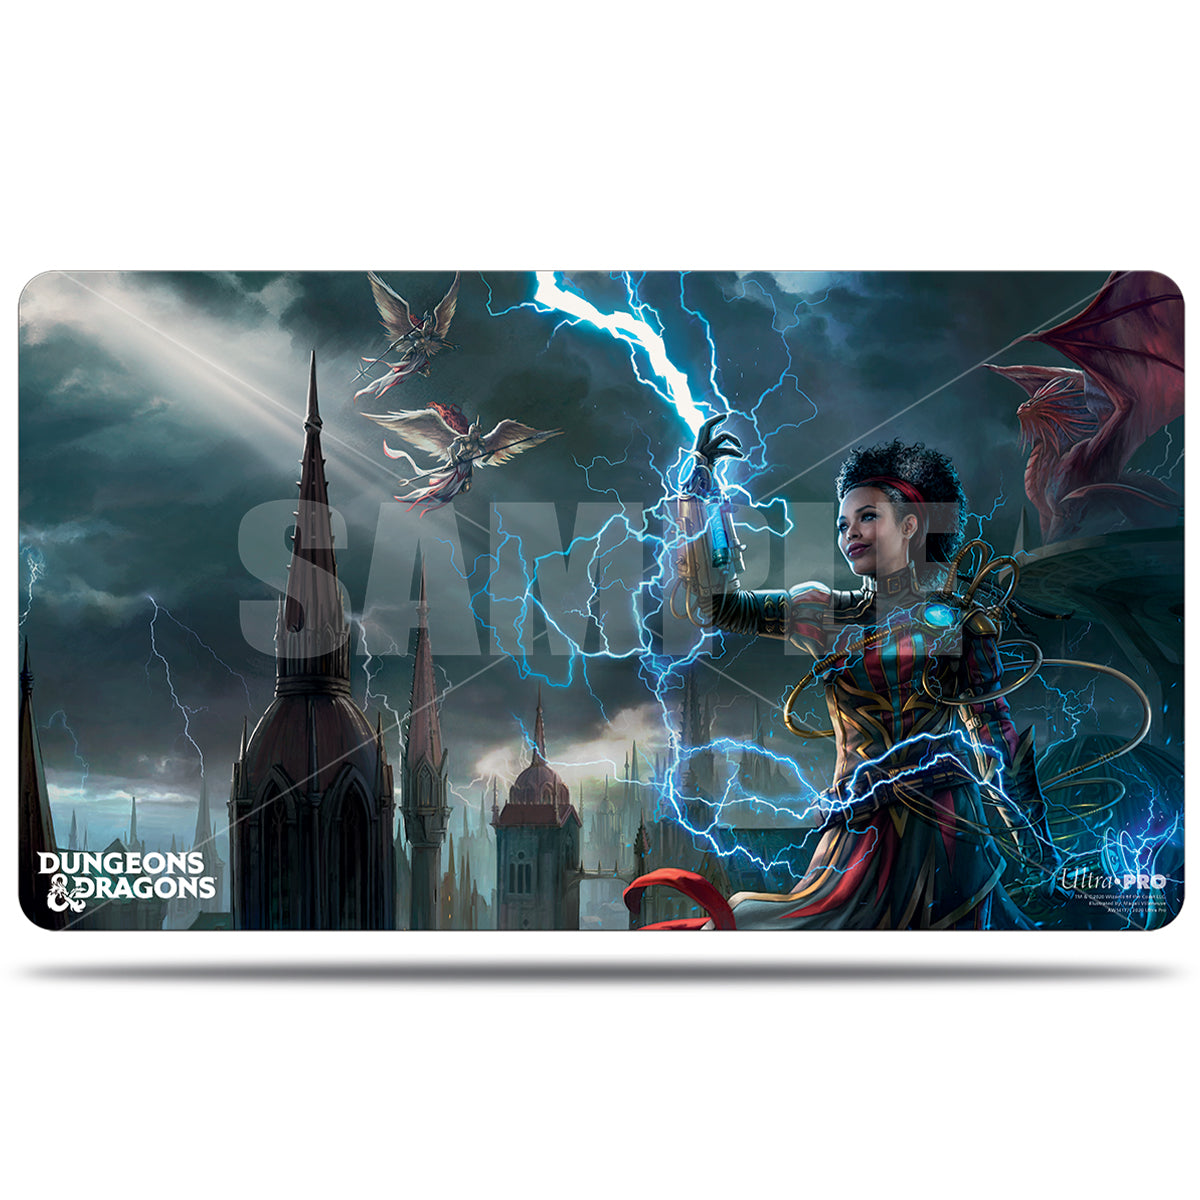 Dungeons & Dragons Cover Series Guide to Ravnica Playmat